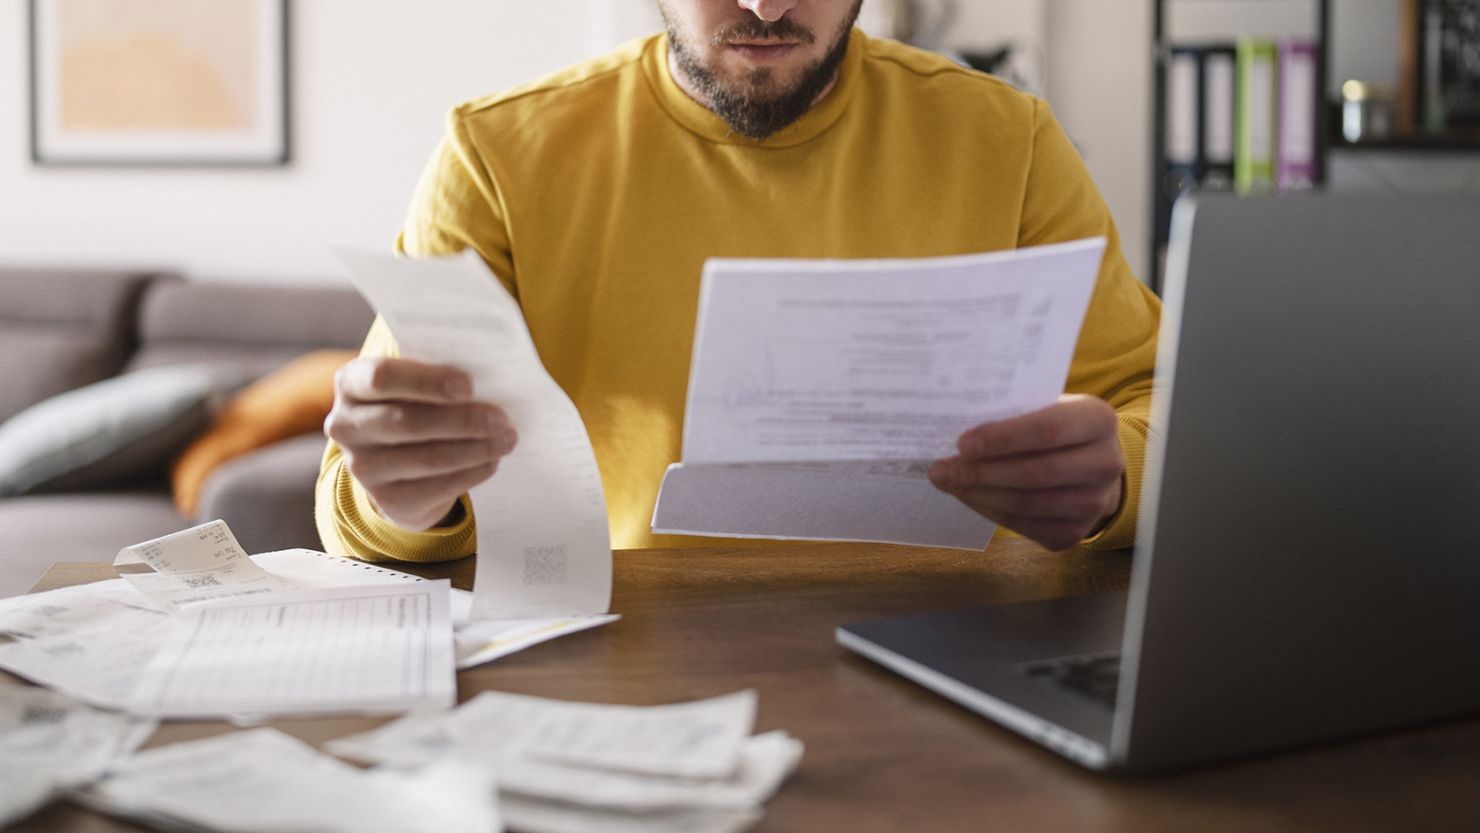 When you don't have enough savings to quickly pay for an emergency expense, the last thing you need is to have to pay high rates to borrow money.